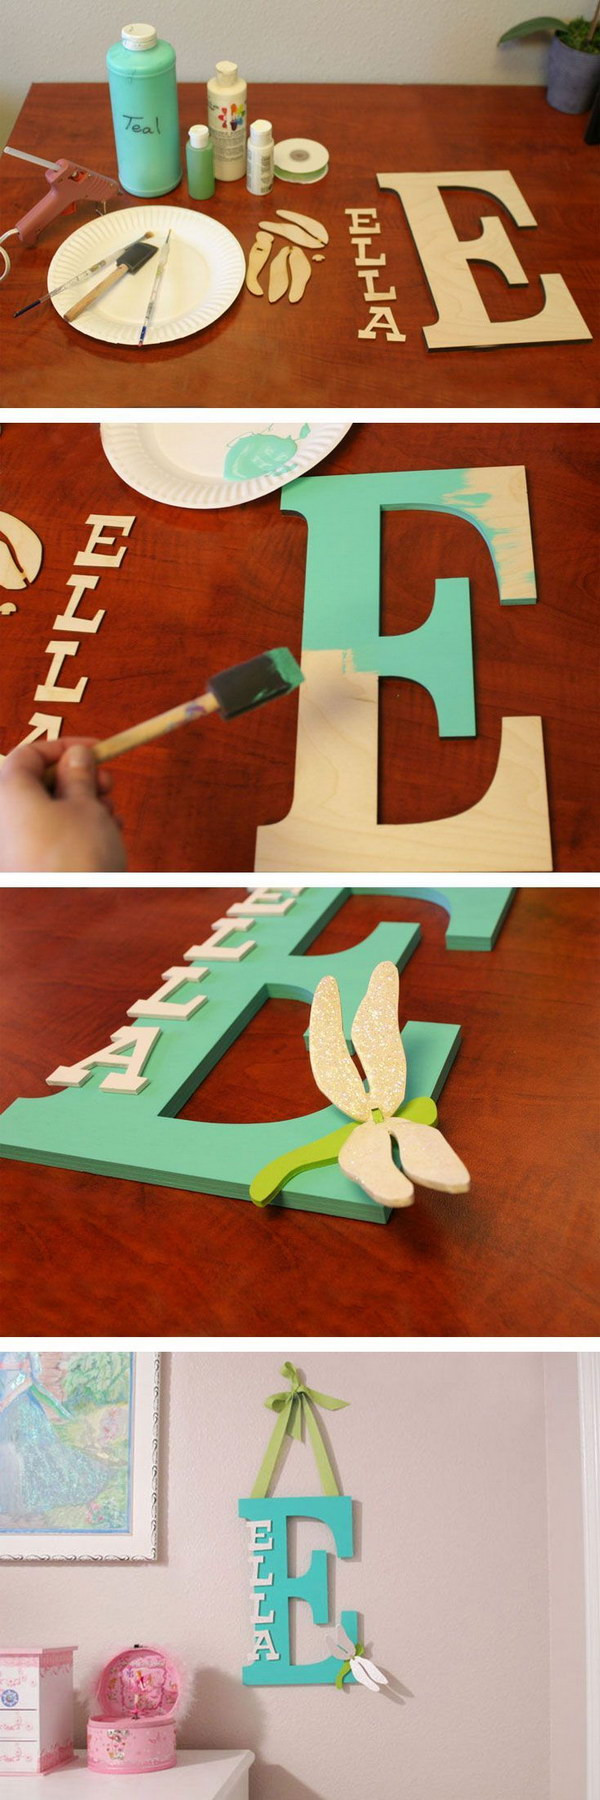 DIY Wood Letters
 45 Awesome DIY Ideas for Making Your Own Decorative